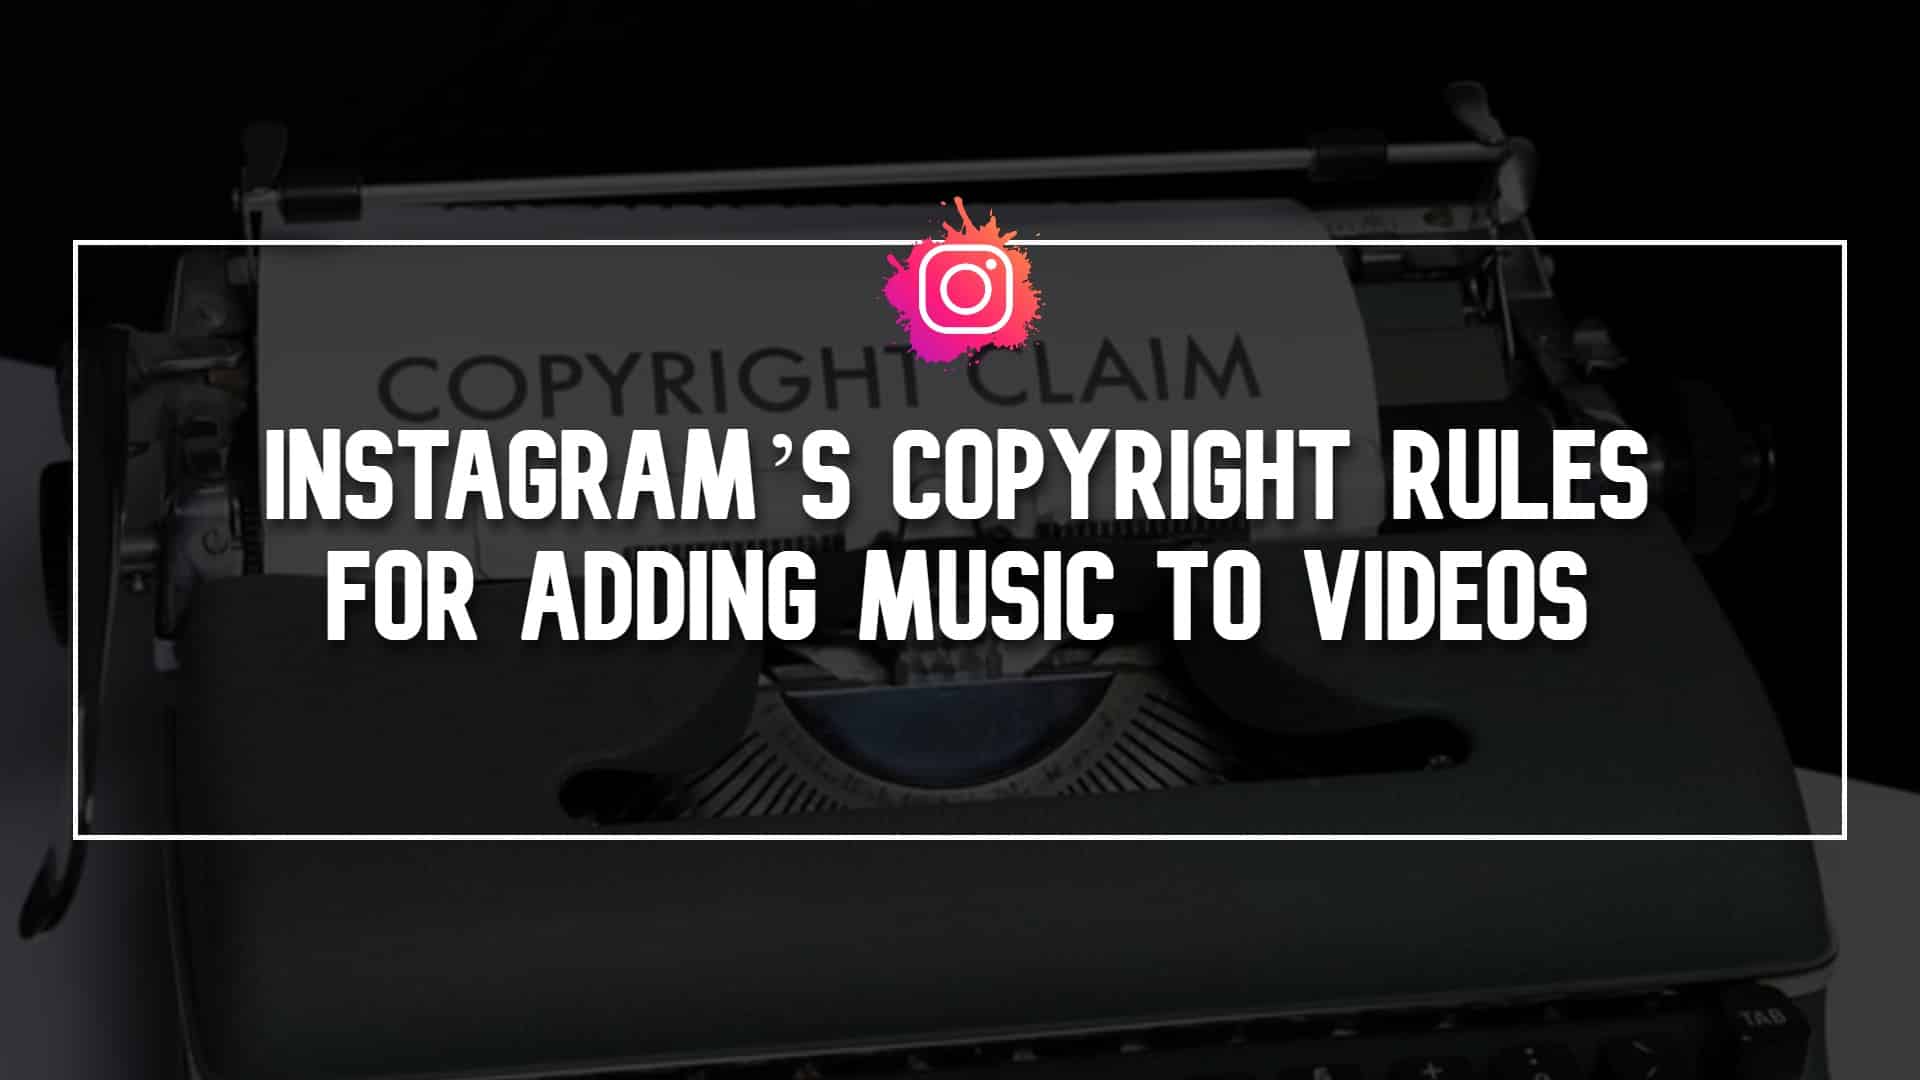 Instagrams-Copyright-Rules-for-Adding-Music-to-Videos.jpg